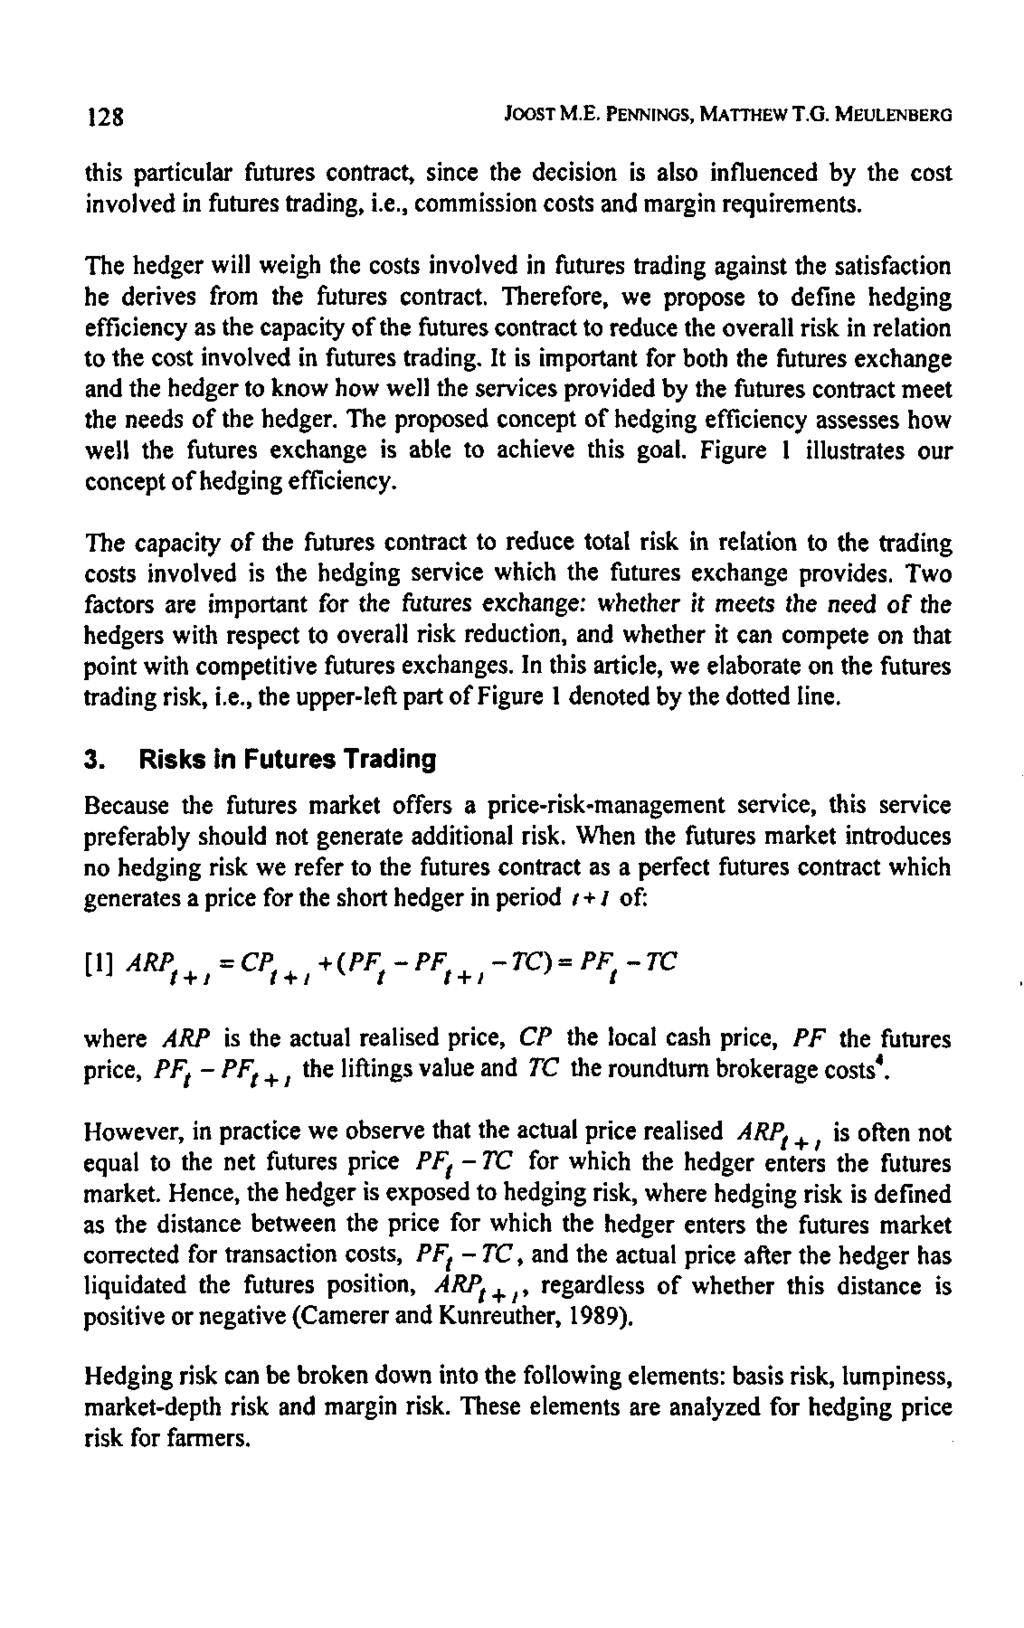 128 JOOSTM.E. PENNINGS,MATTHEWT.G. MEULENBERG this particular futures contract, since the decision is also influenced by the cost involved in futures trading, i.e., commission costs and margin requirements.